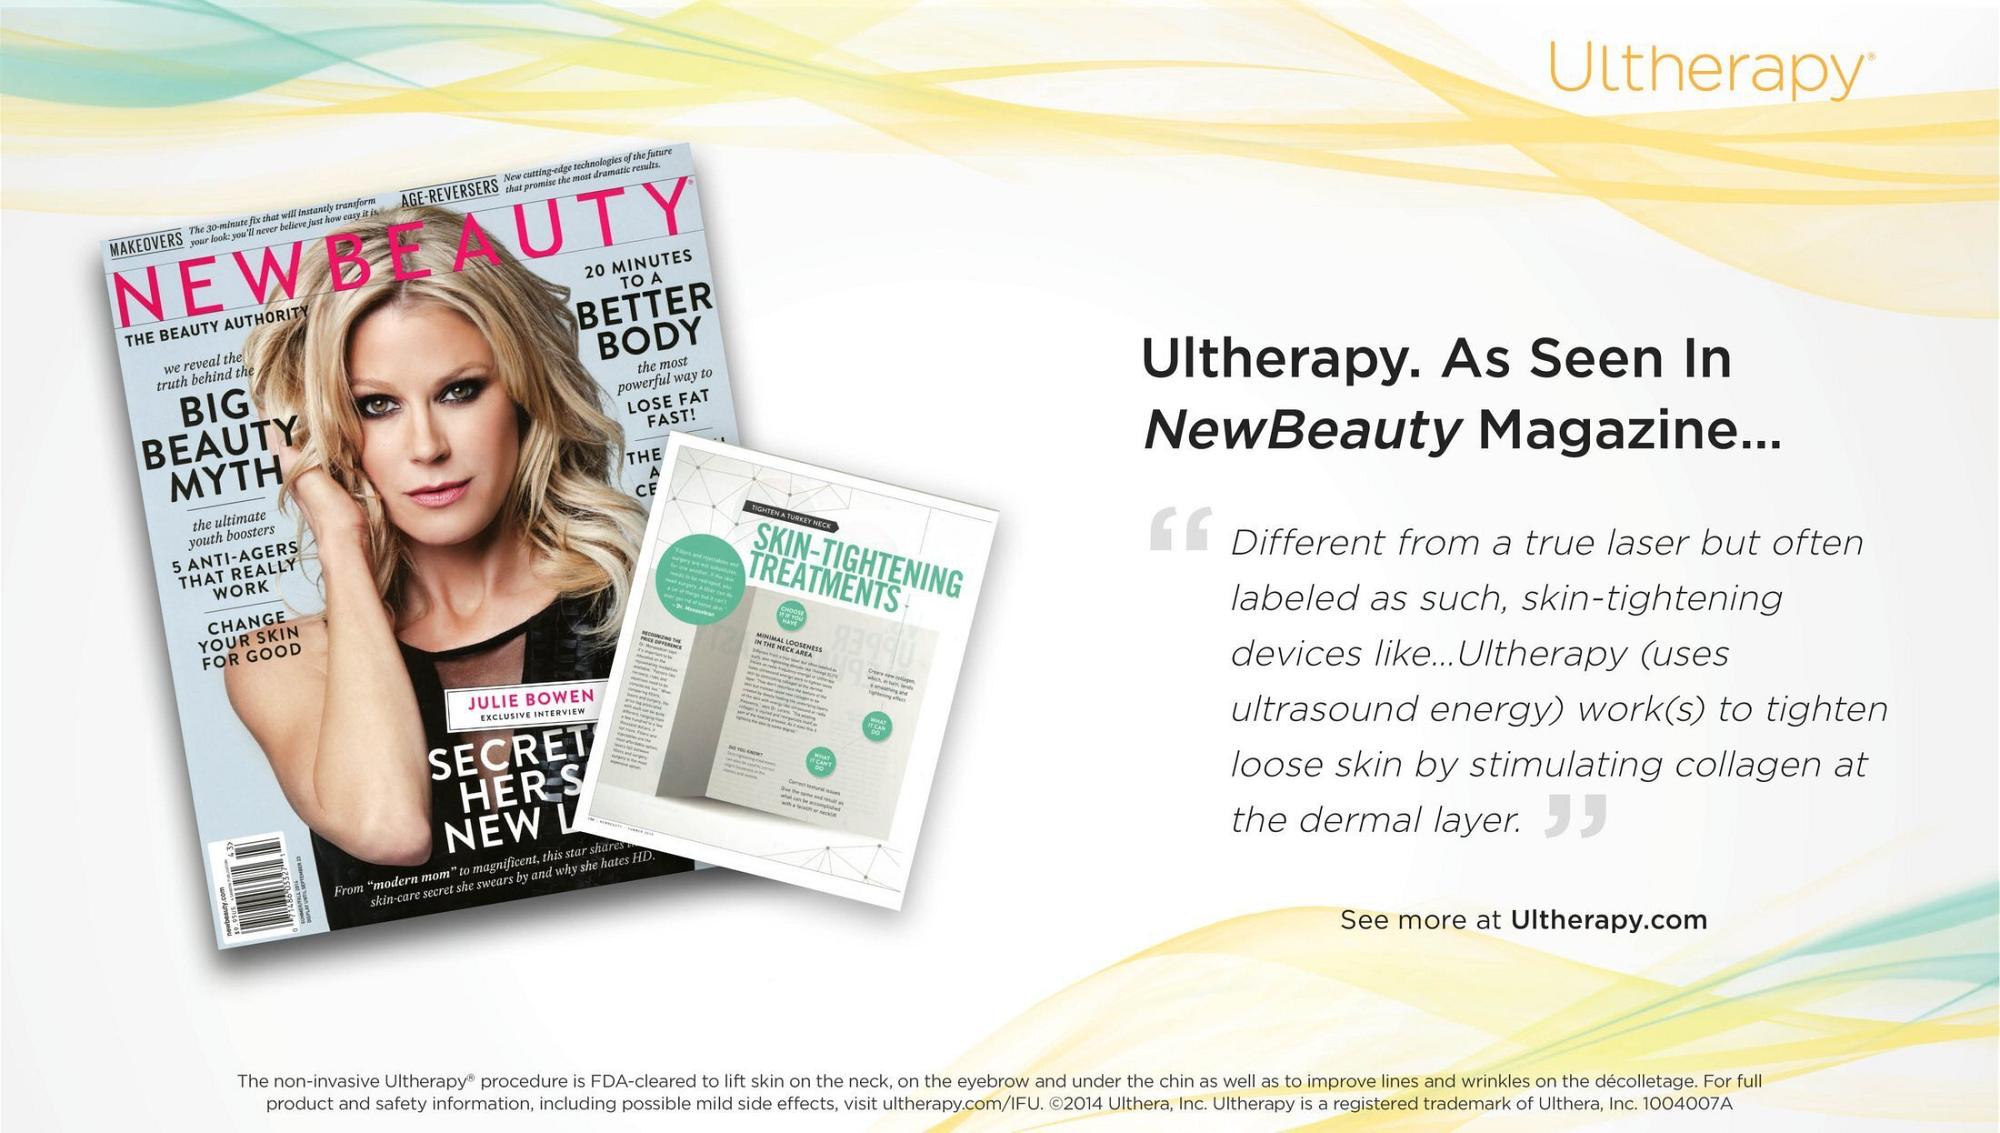 Ultherapy as seen in New Beauty Magazine